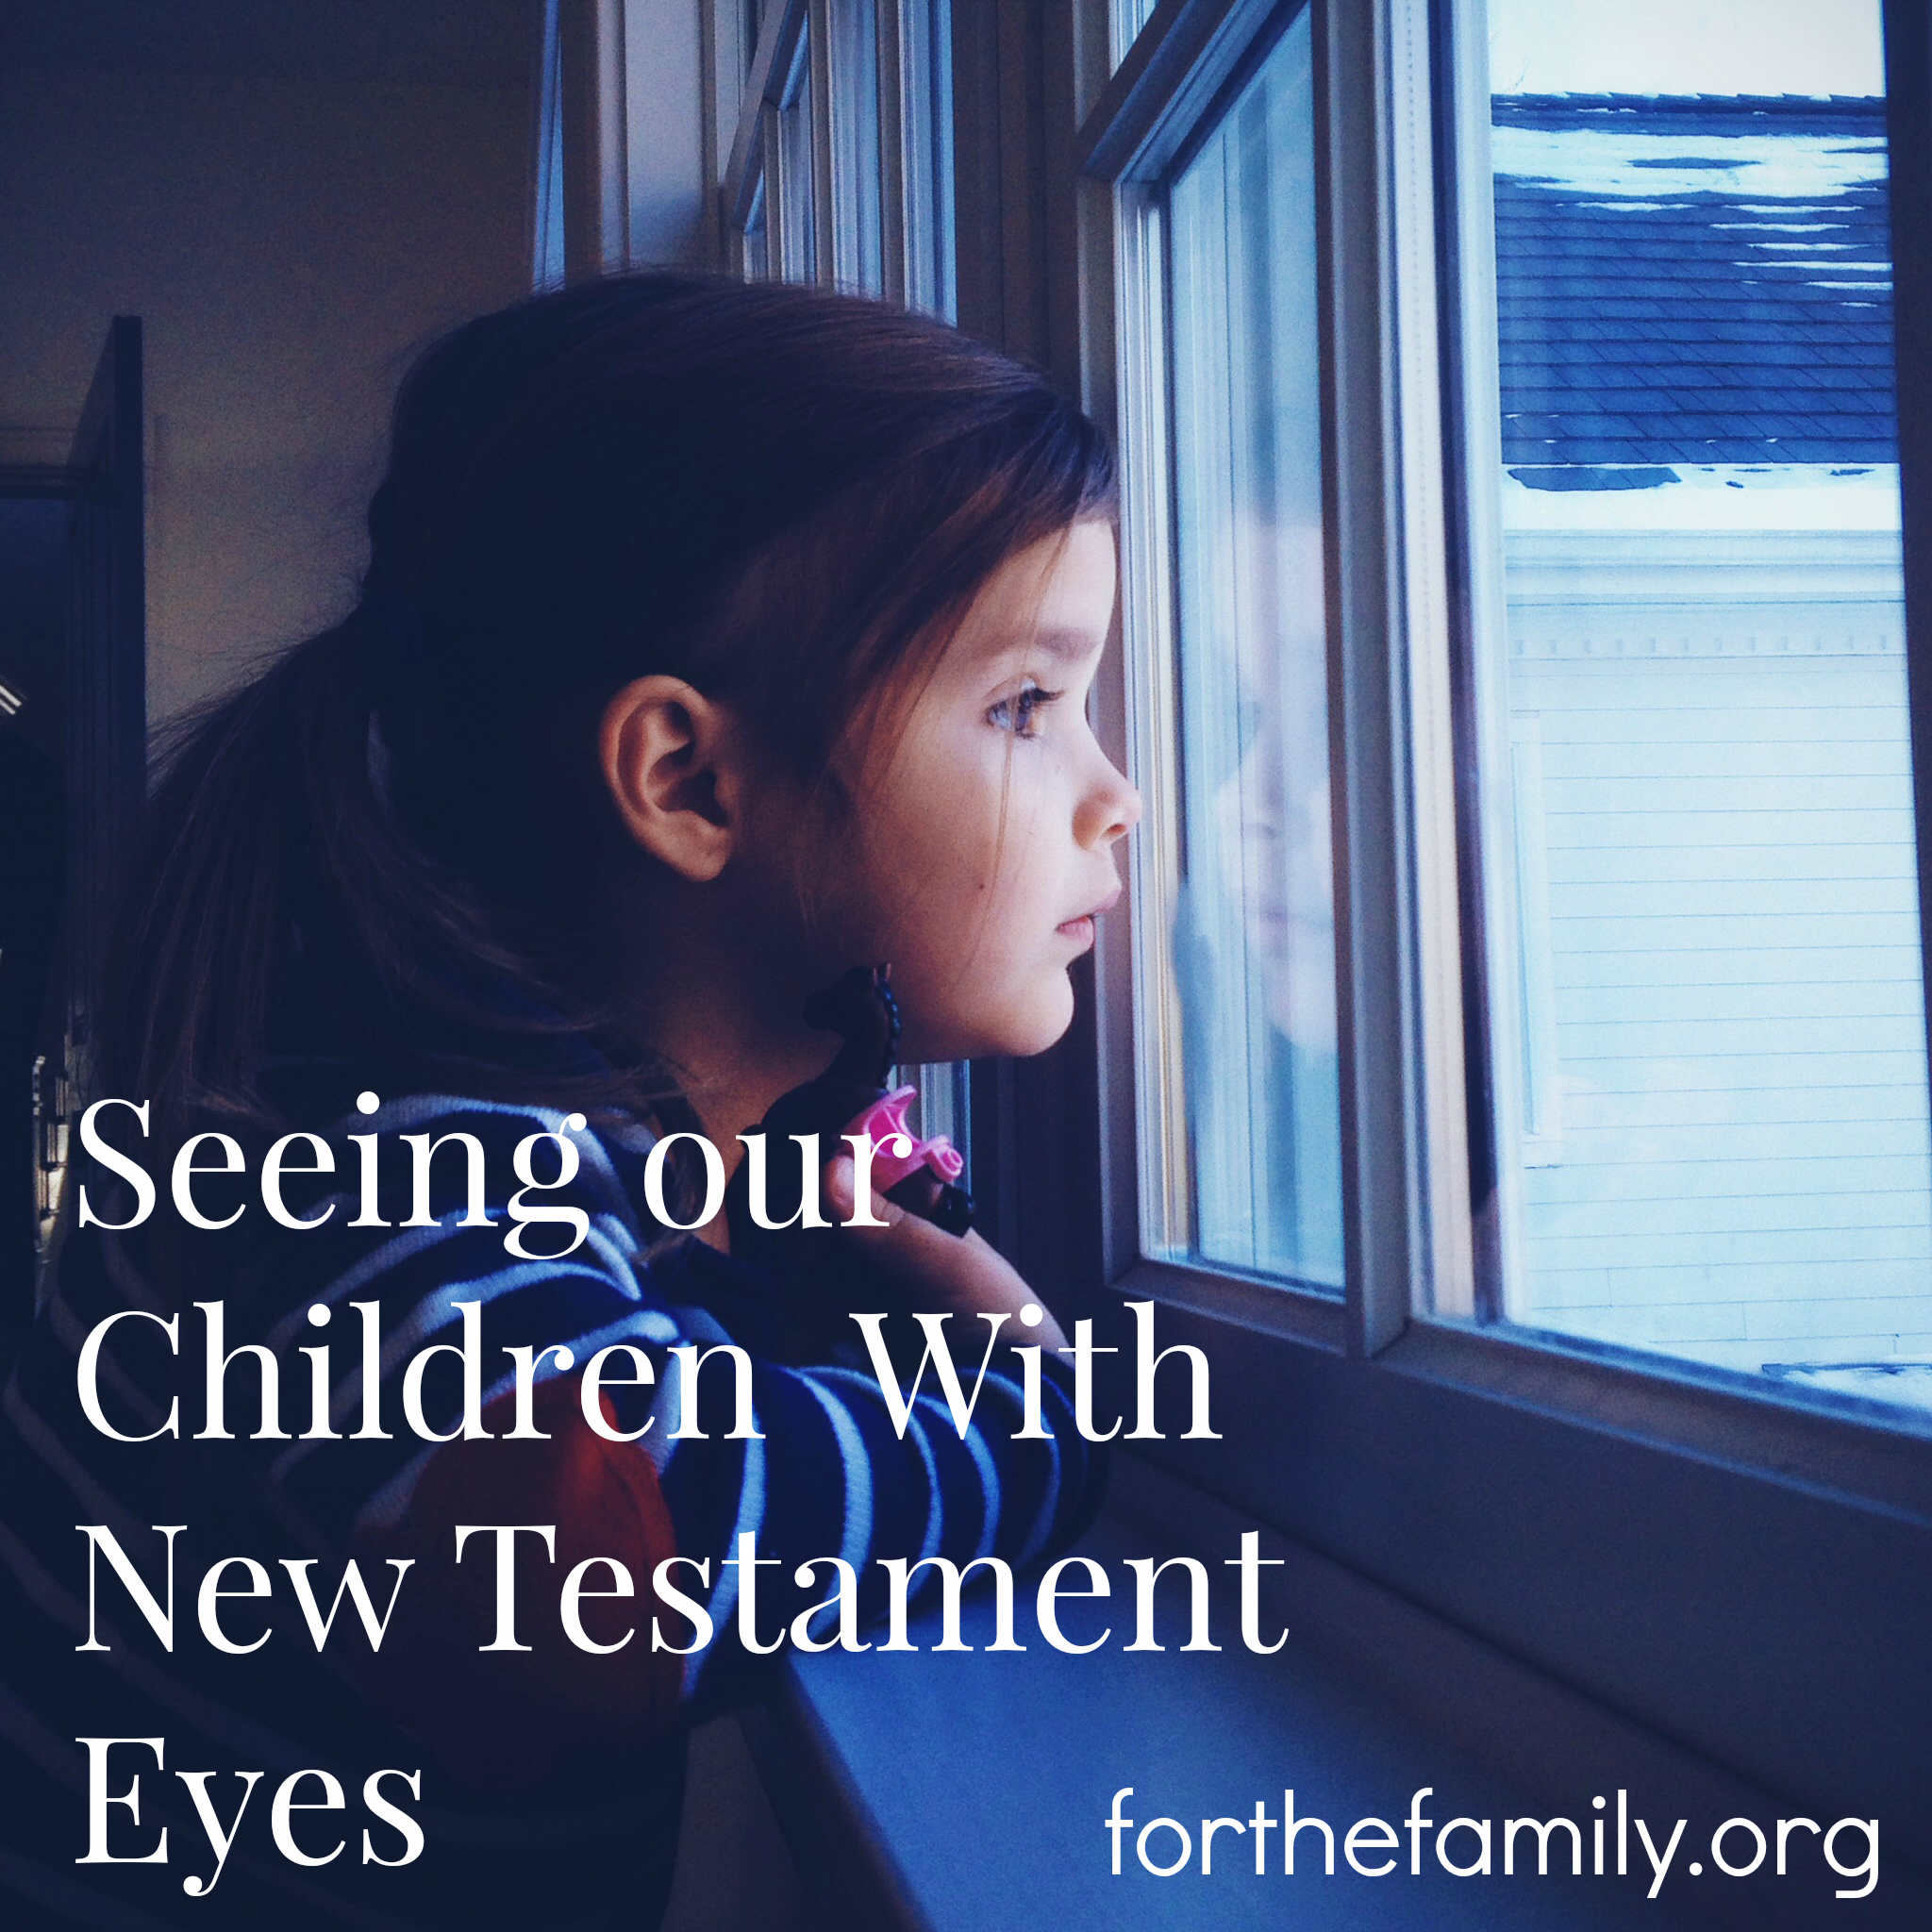 Seeing our Children With New Testament Eyes